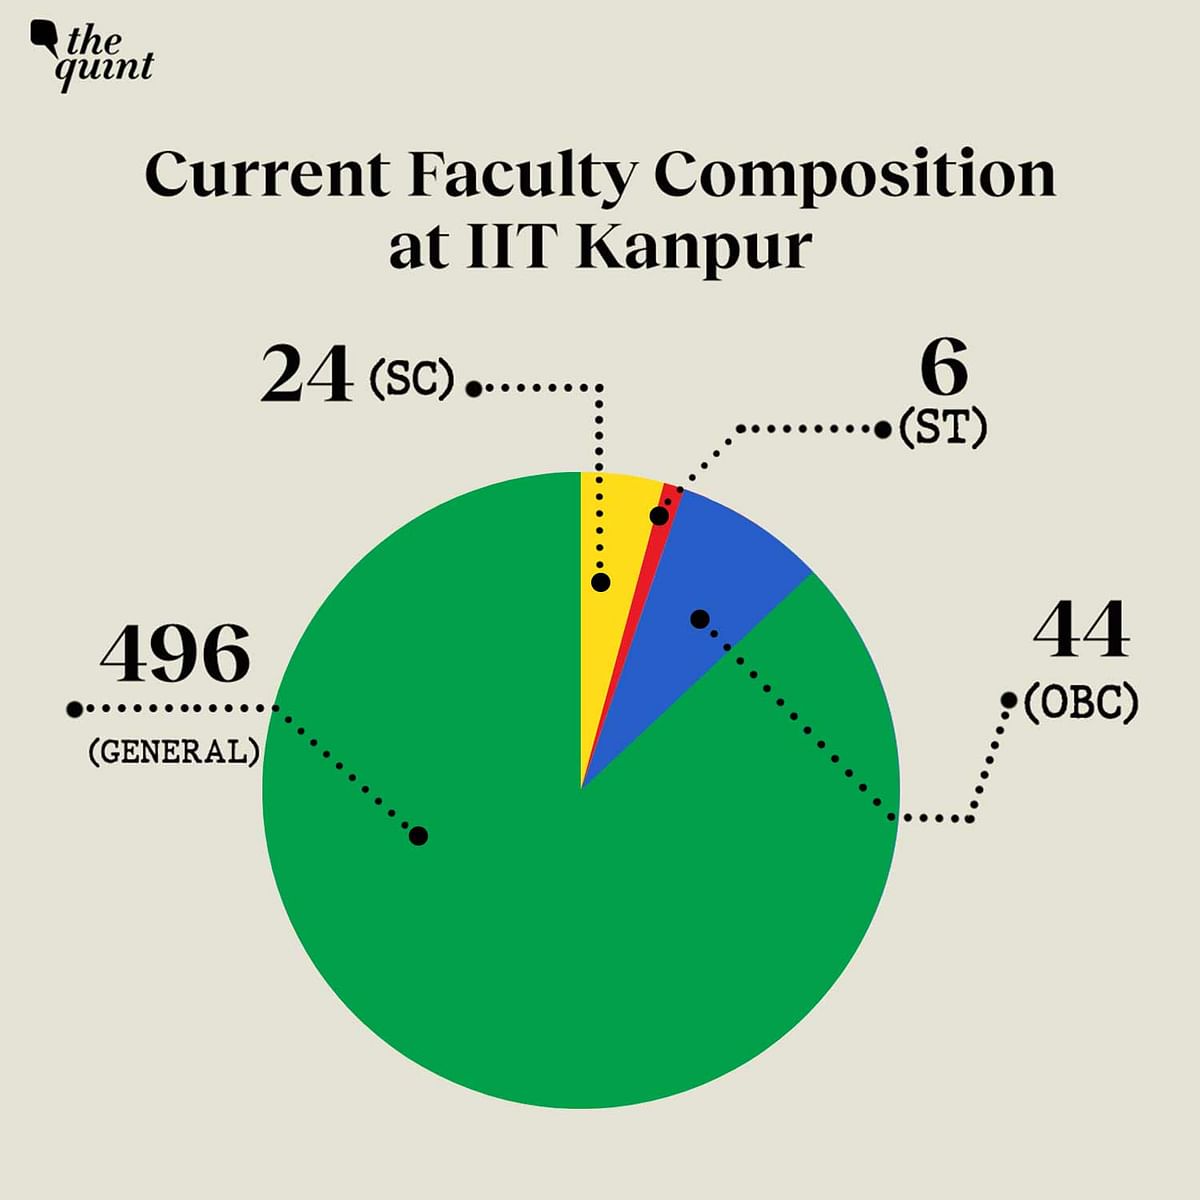 Let’s take a look at what the data from the RTI response indicates about SC/ST/OBC representation across IITs.